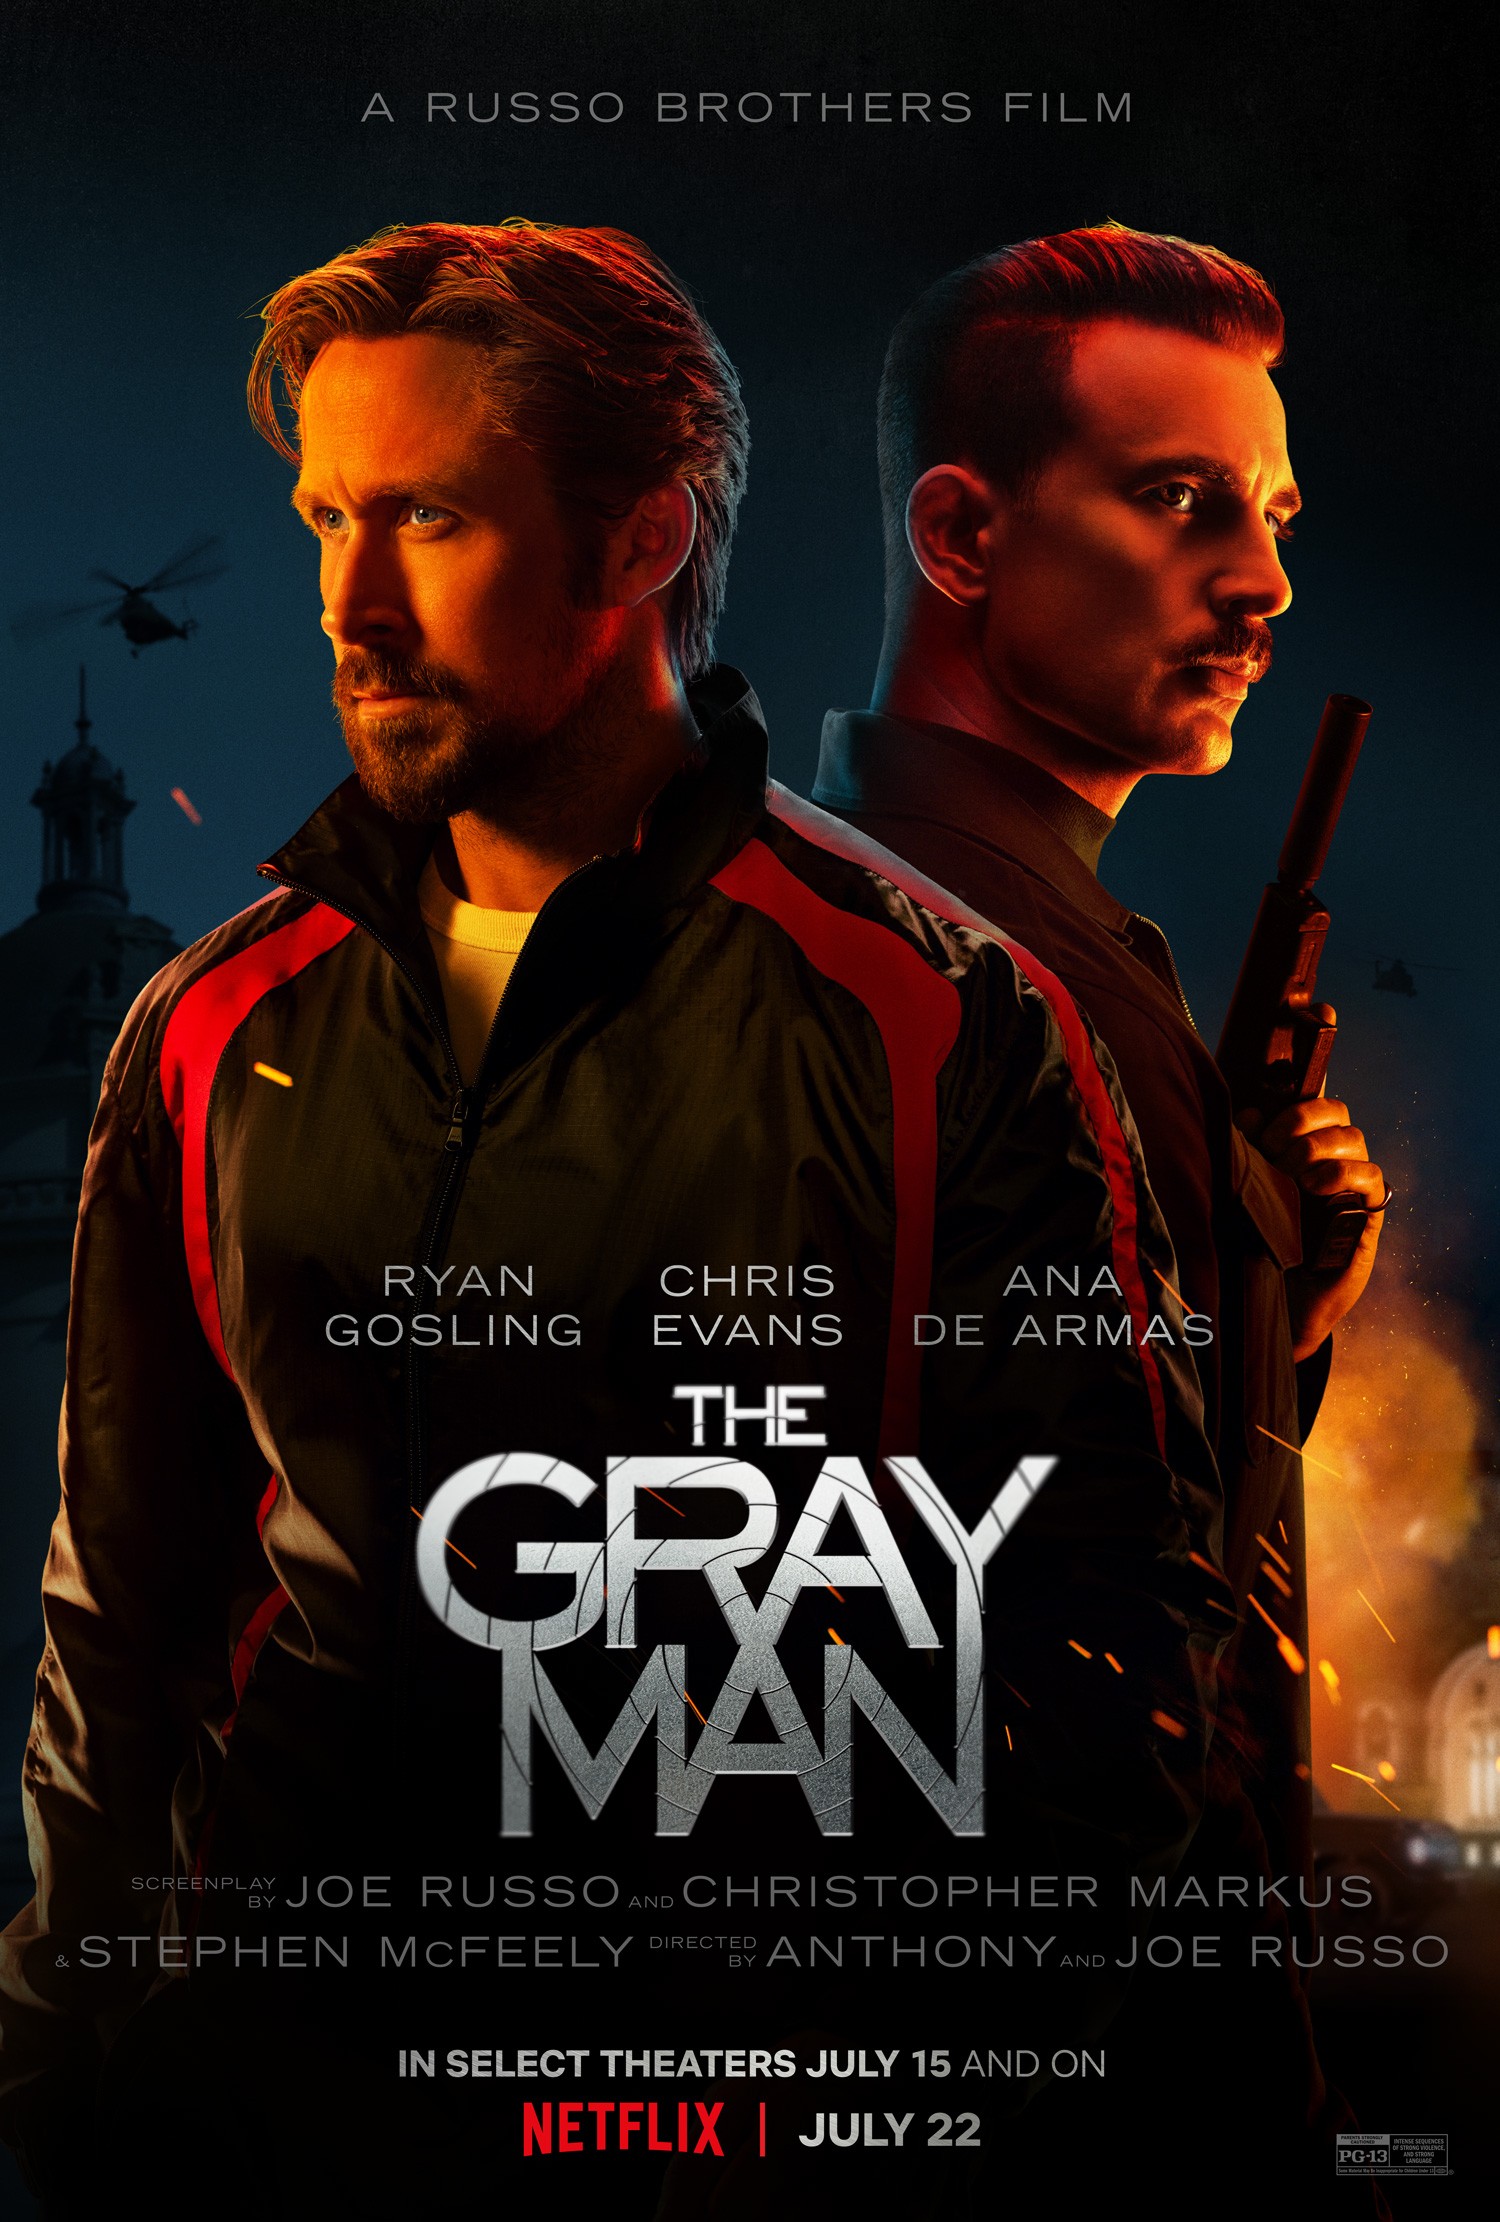 Promotional poster for "The Gray Man."